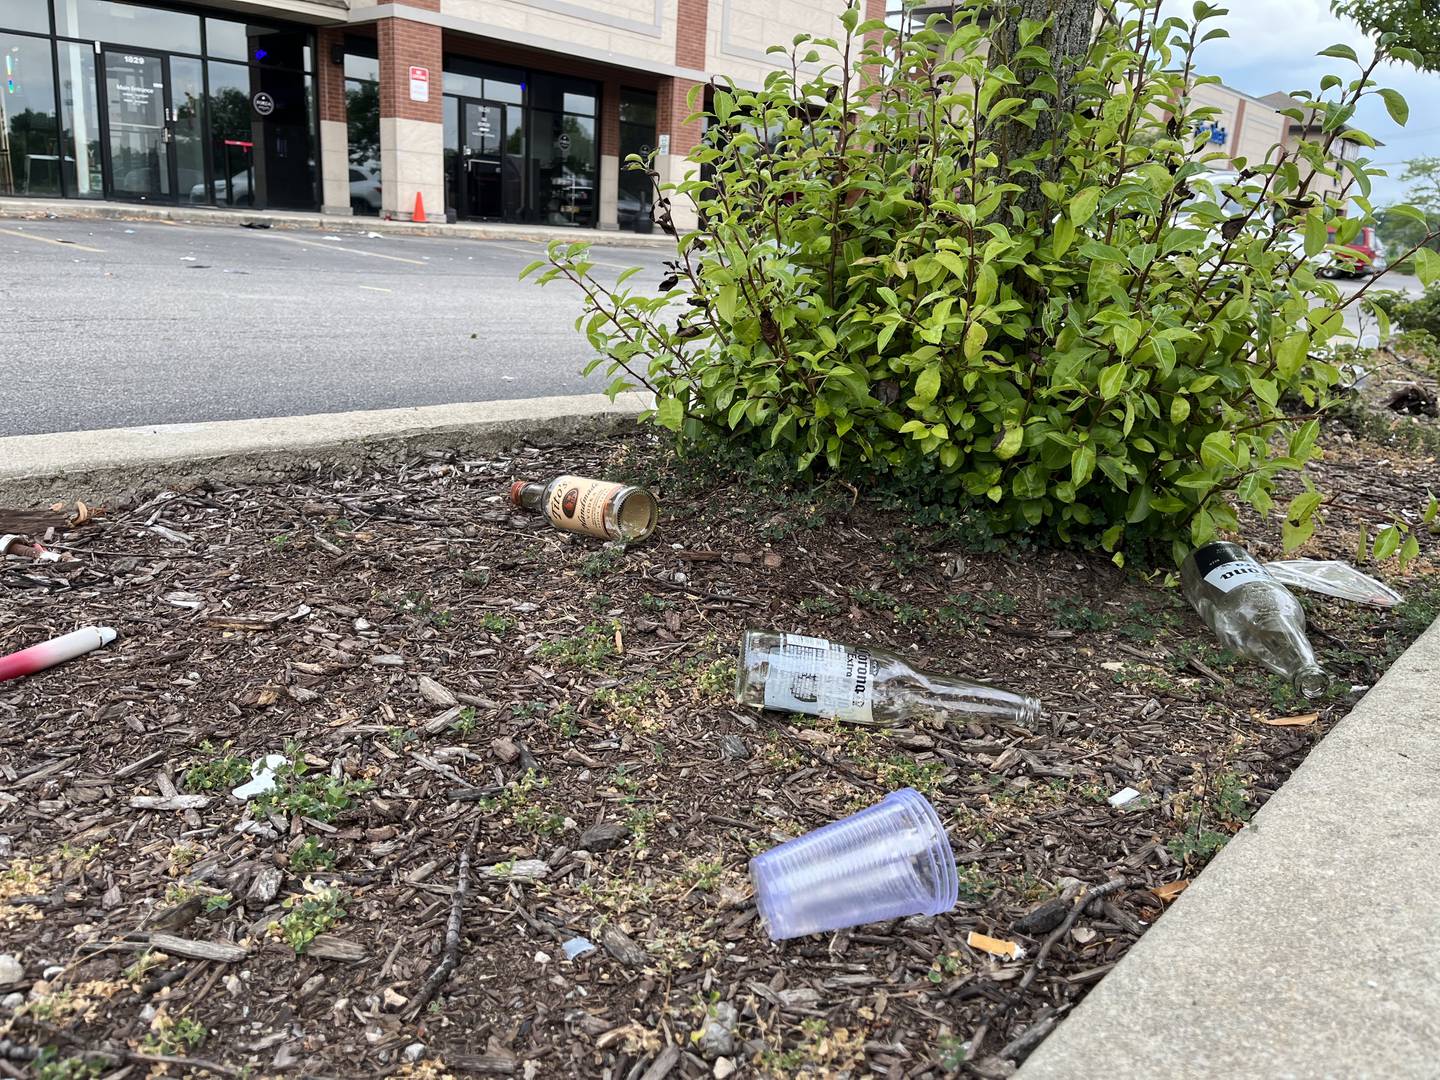 Bottles of beer, liquor and empty plastic cups on a concrete planter at the parking lot of Forza Table & Tap, 1827 Knapp St., Crest Hill, seen on Monday, July 11, 2022.